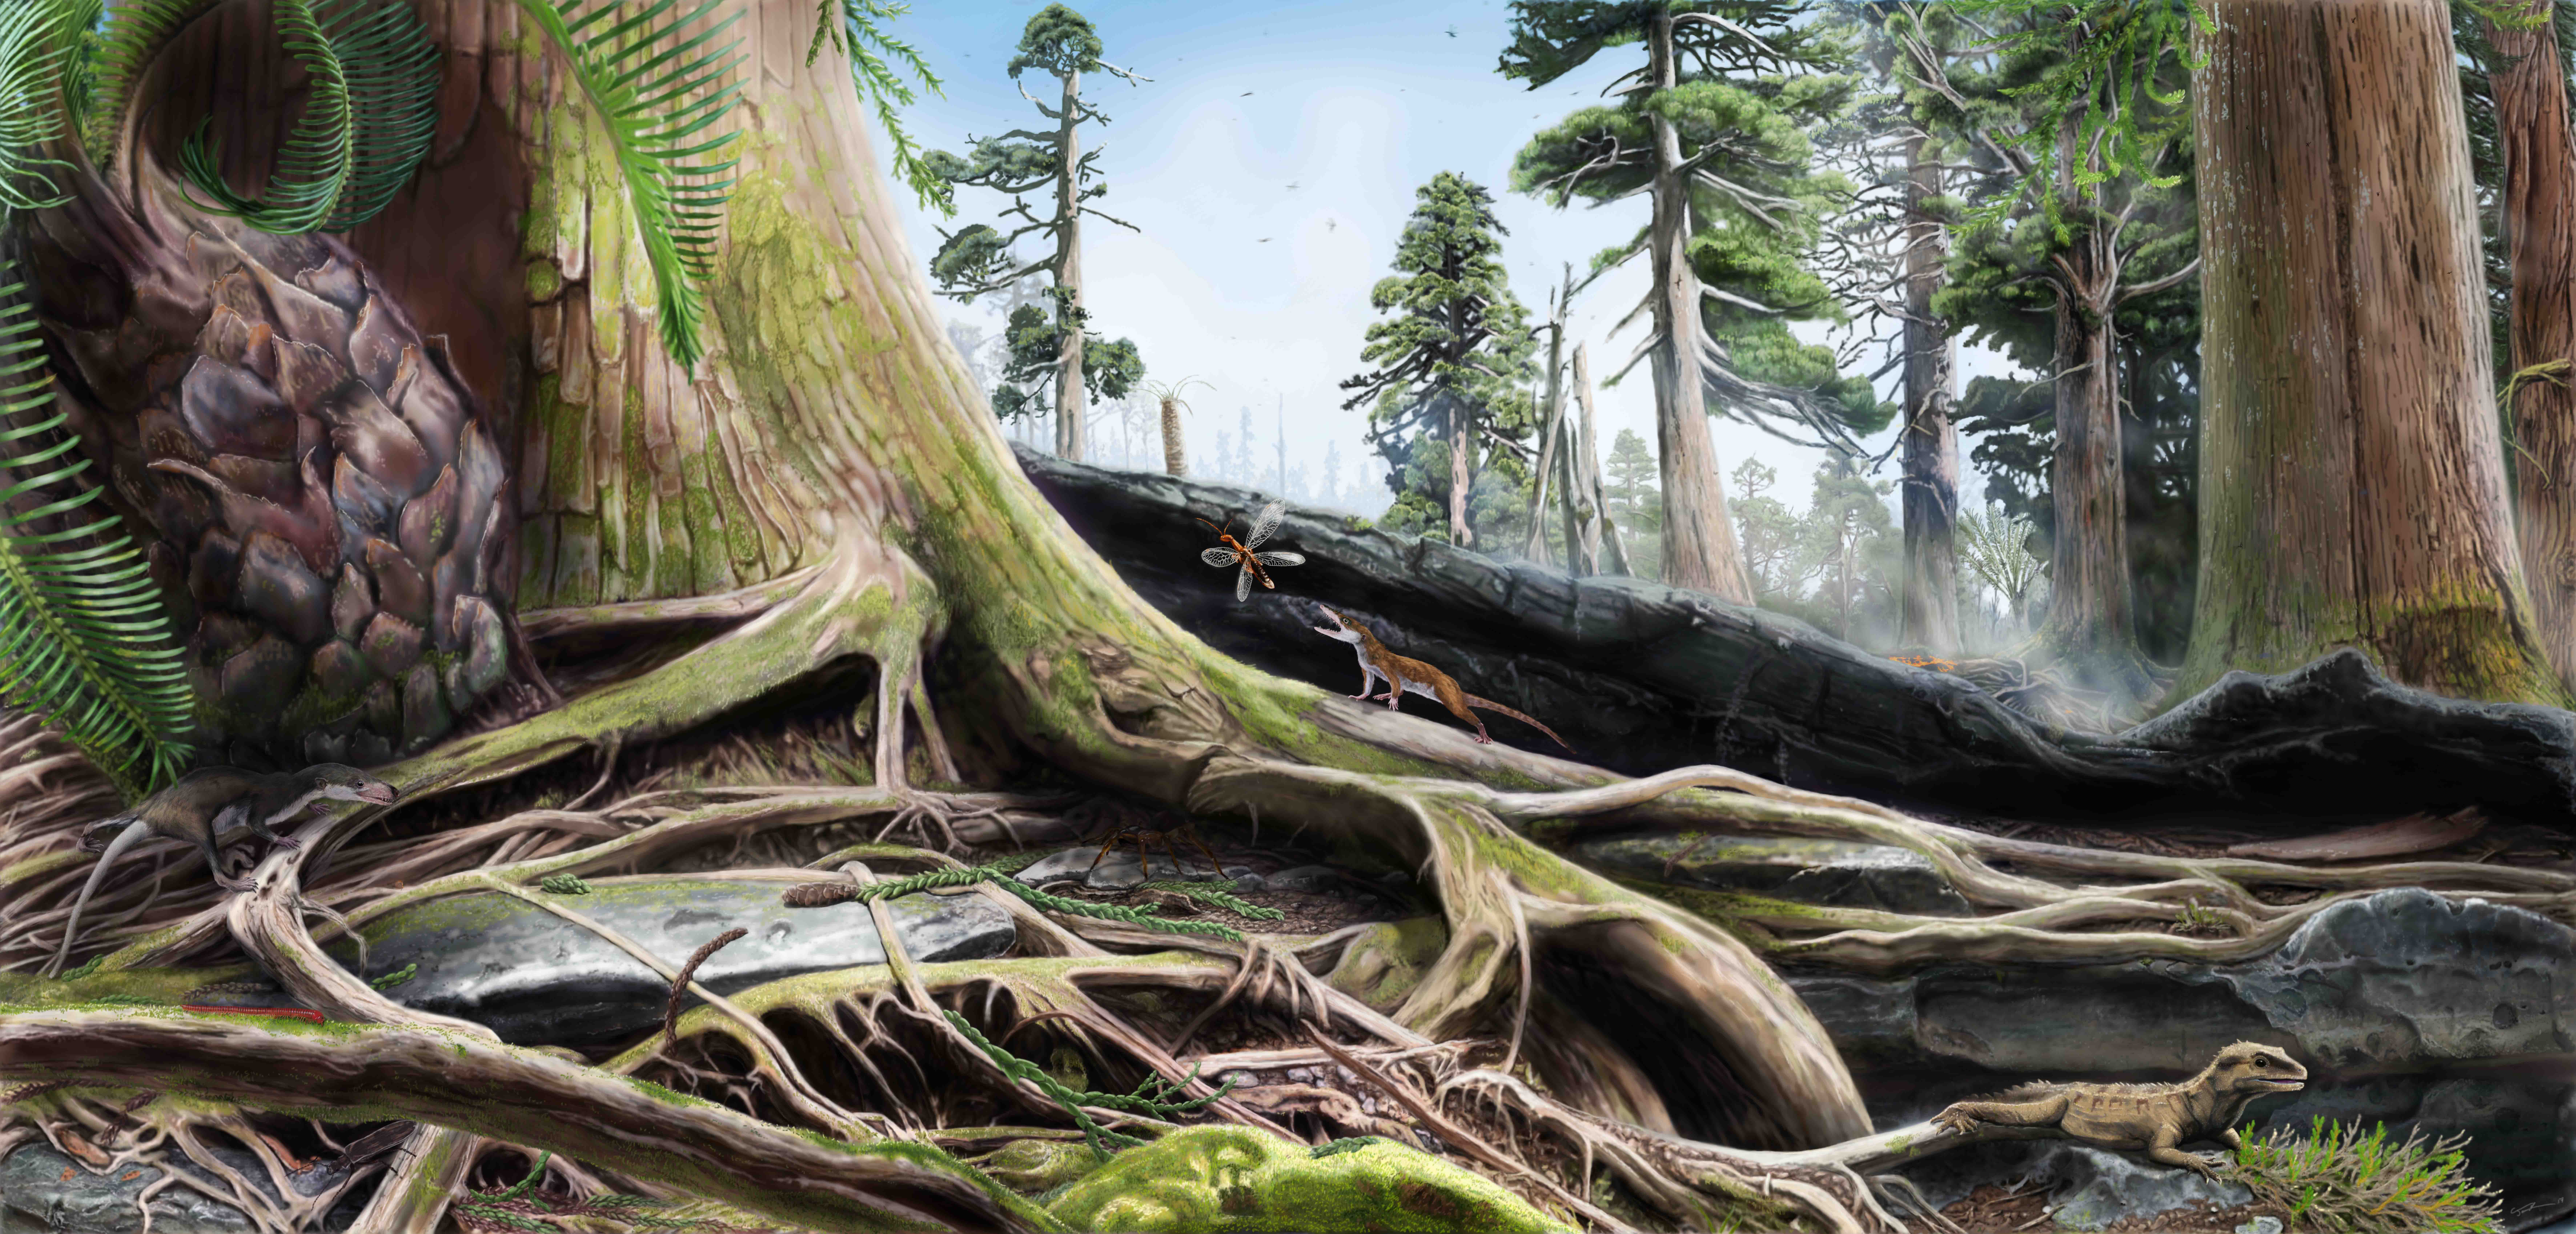 A reconstruction of the Jurassic landscape by artist James Brown, can you spot the tiny animals? ©James Brown